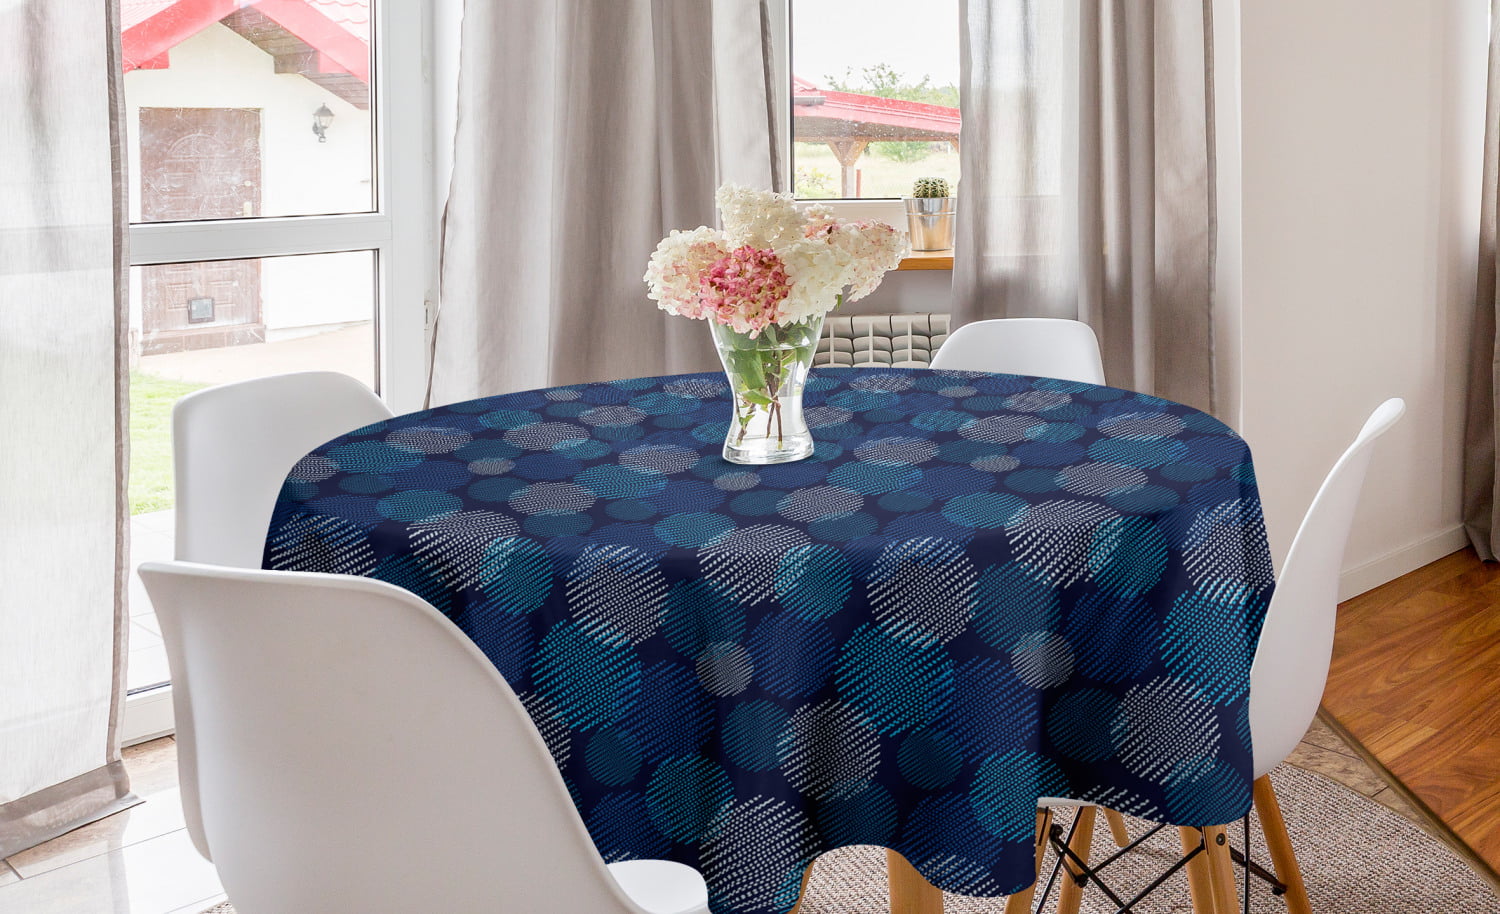 16 X 90 Dining Room Kitchen Rectangular Runner Geometric Circles with Little Dotted Doodle on Polka Dots Backdrop Art Deco Ambesonne Abstract Table Runner Coral Night Blue